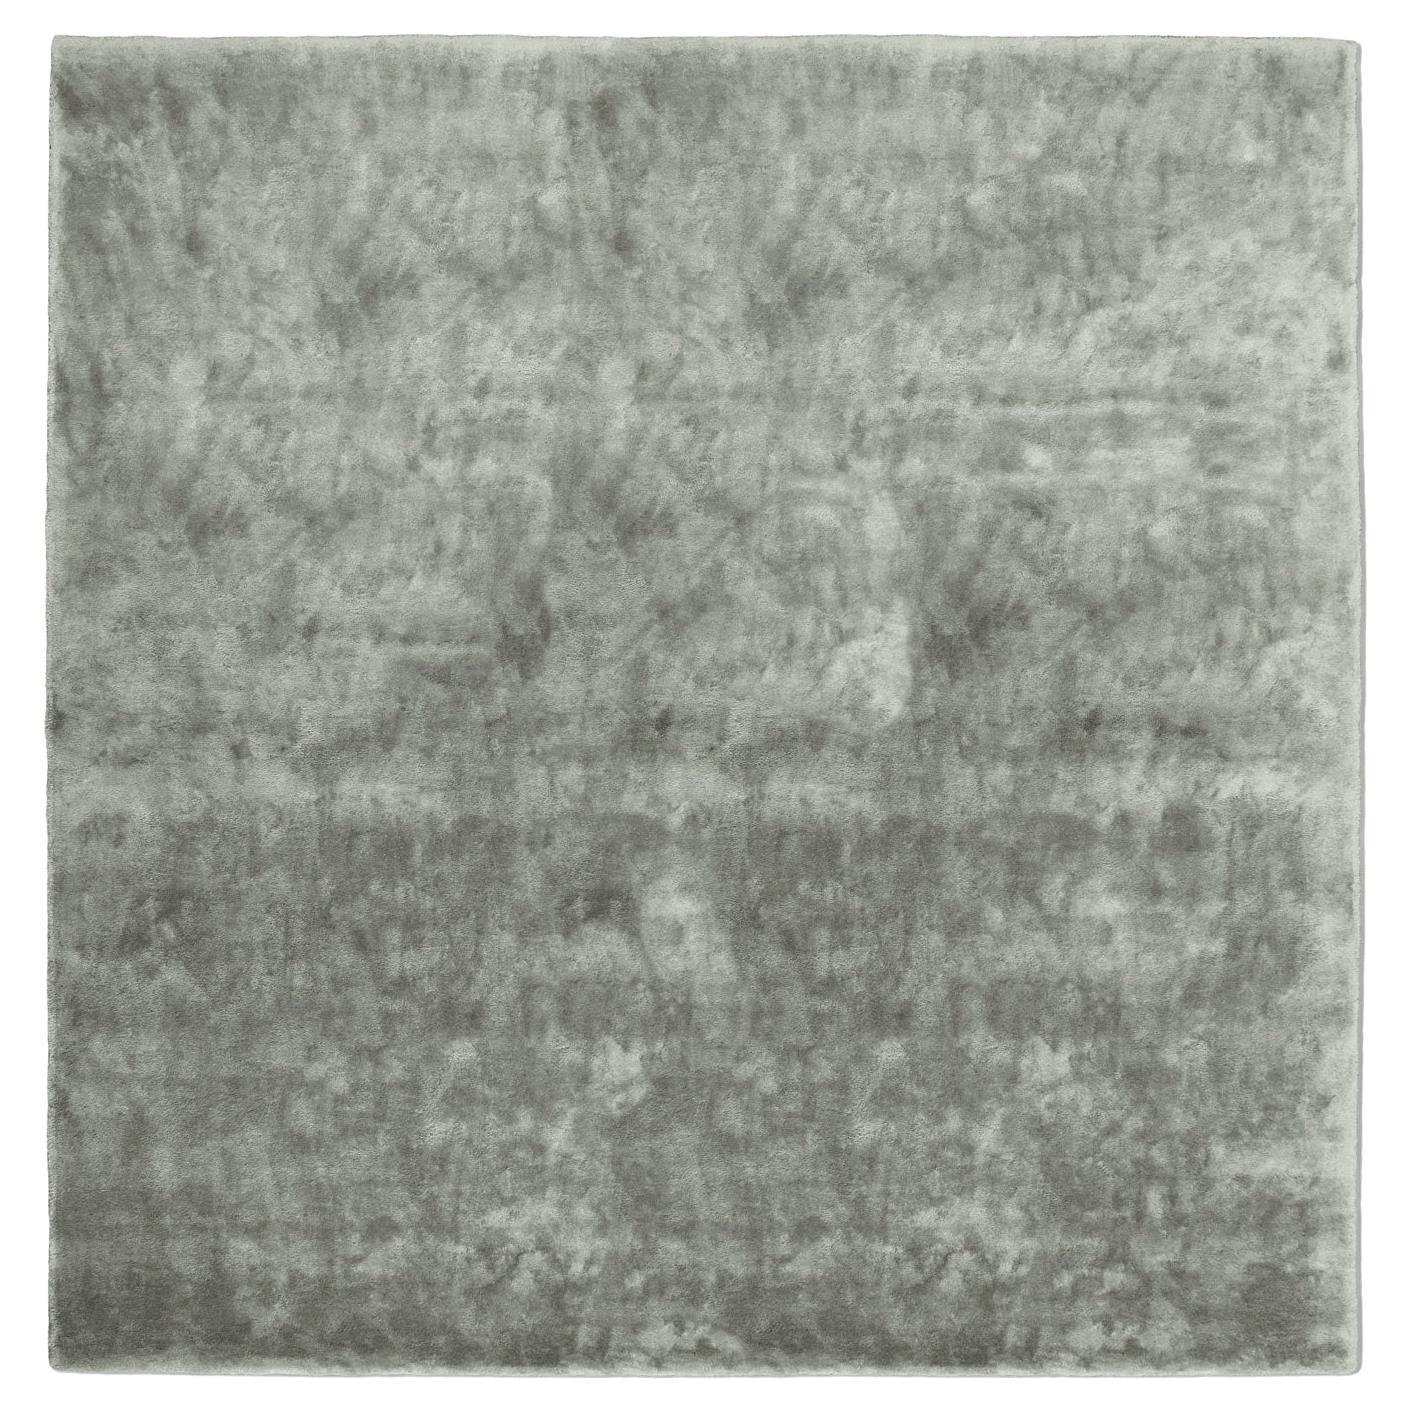 21st Cent Eco-Friendly Grey Green Rug by Deanna Comellini In Stock 300x300 cm